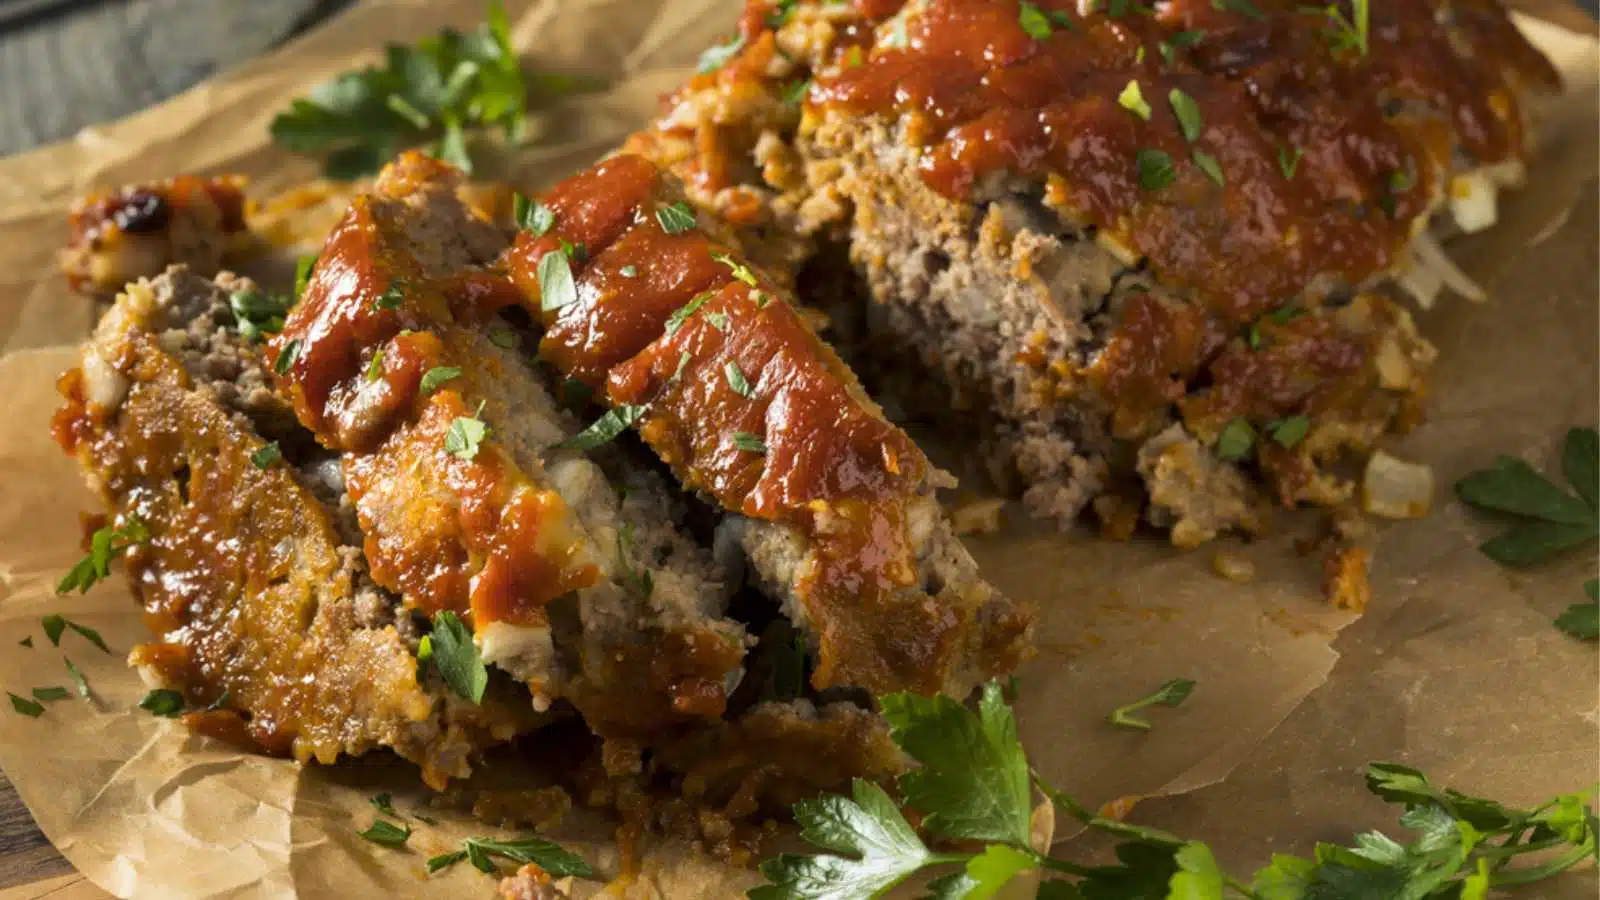 Homemade Savory Spiced Meatloaf with Onion and Parsley